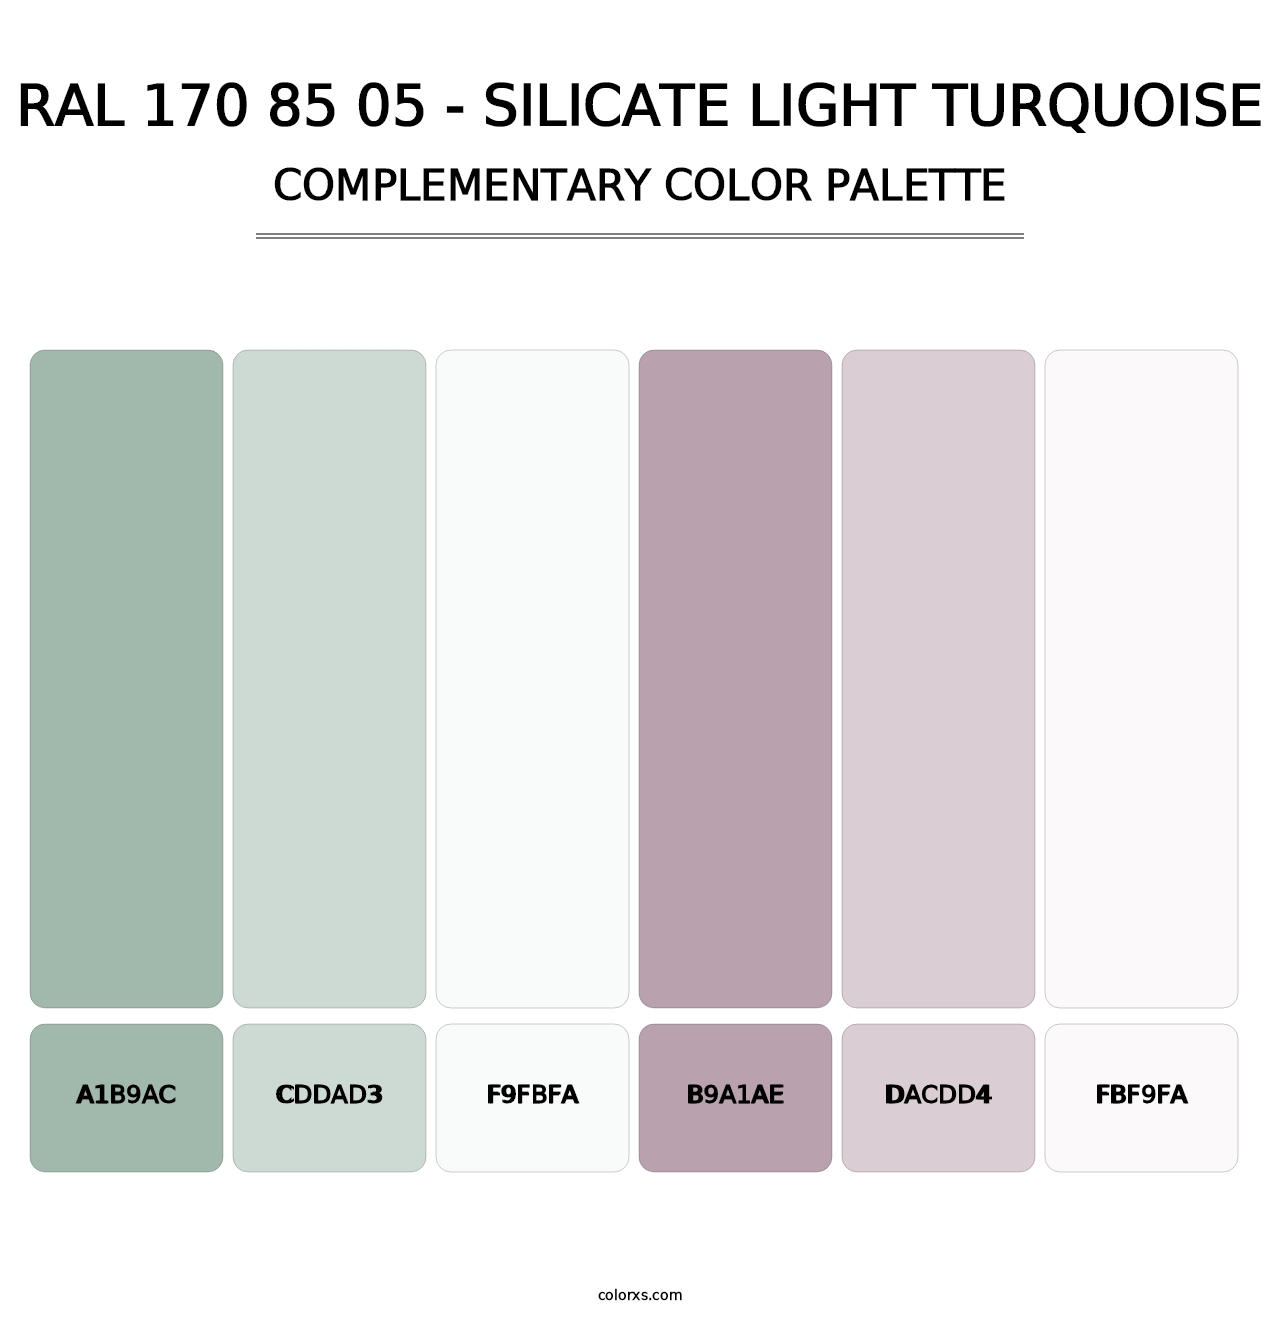 RAL 170 85 05 - Silicate Light Turquoise - Complementary Color Palette